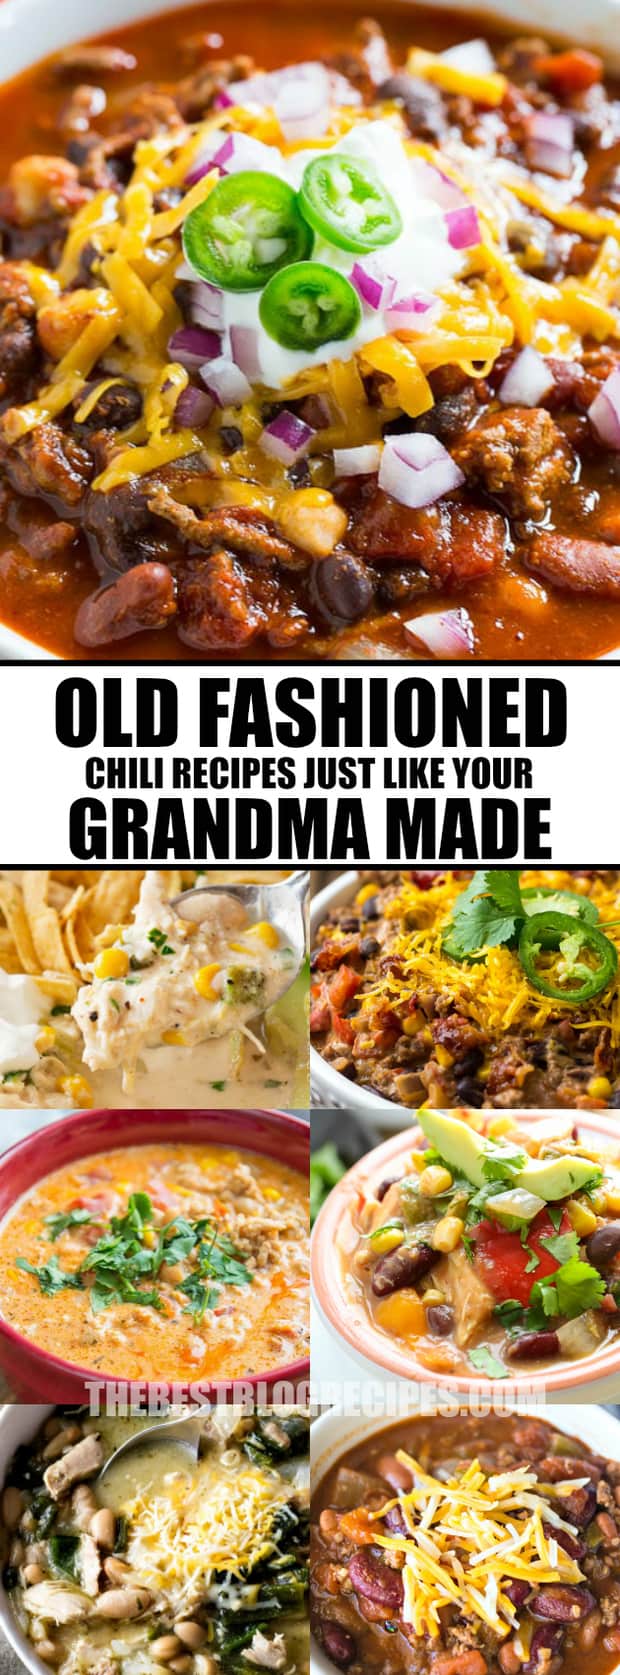 Old Fashioned Chili Recipes just like your Grandma made!